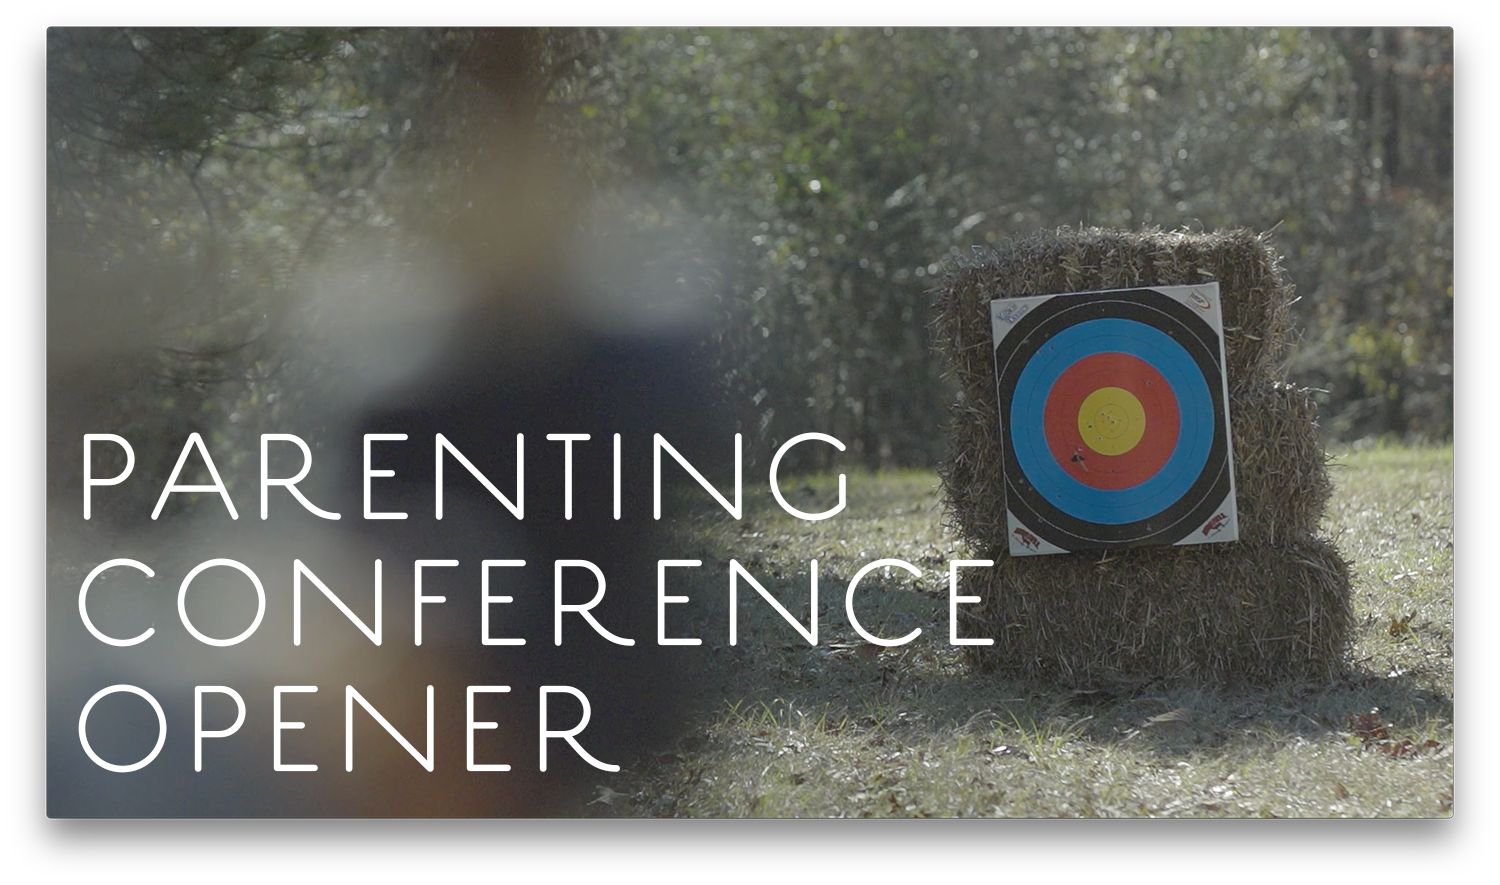 Parenting Conference Opener Video